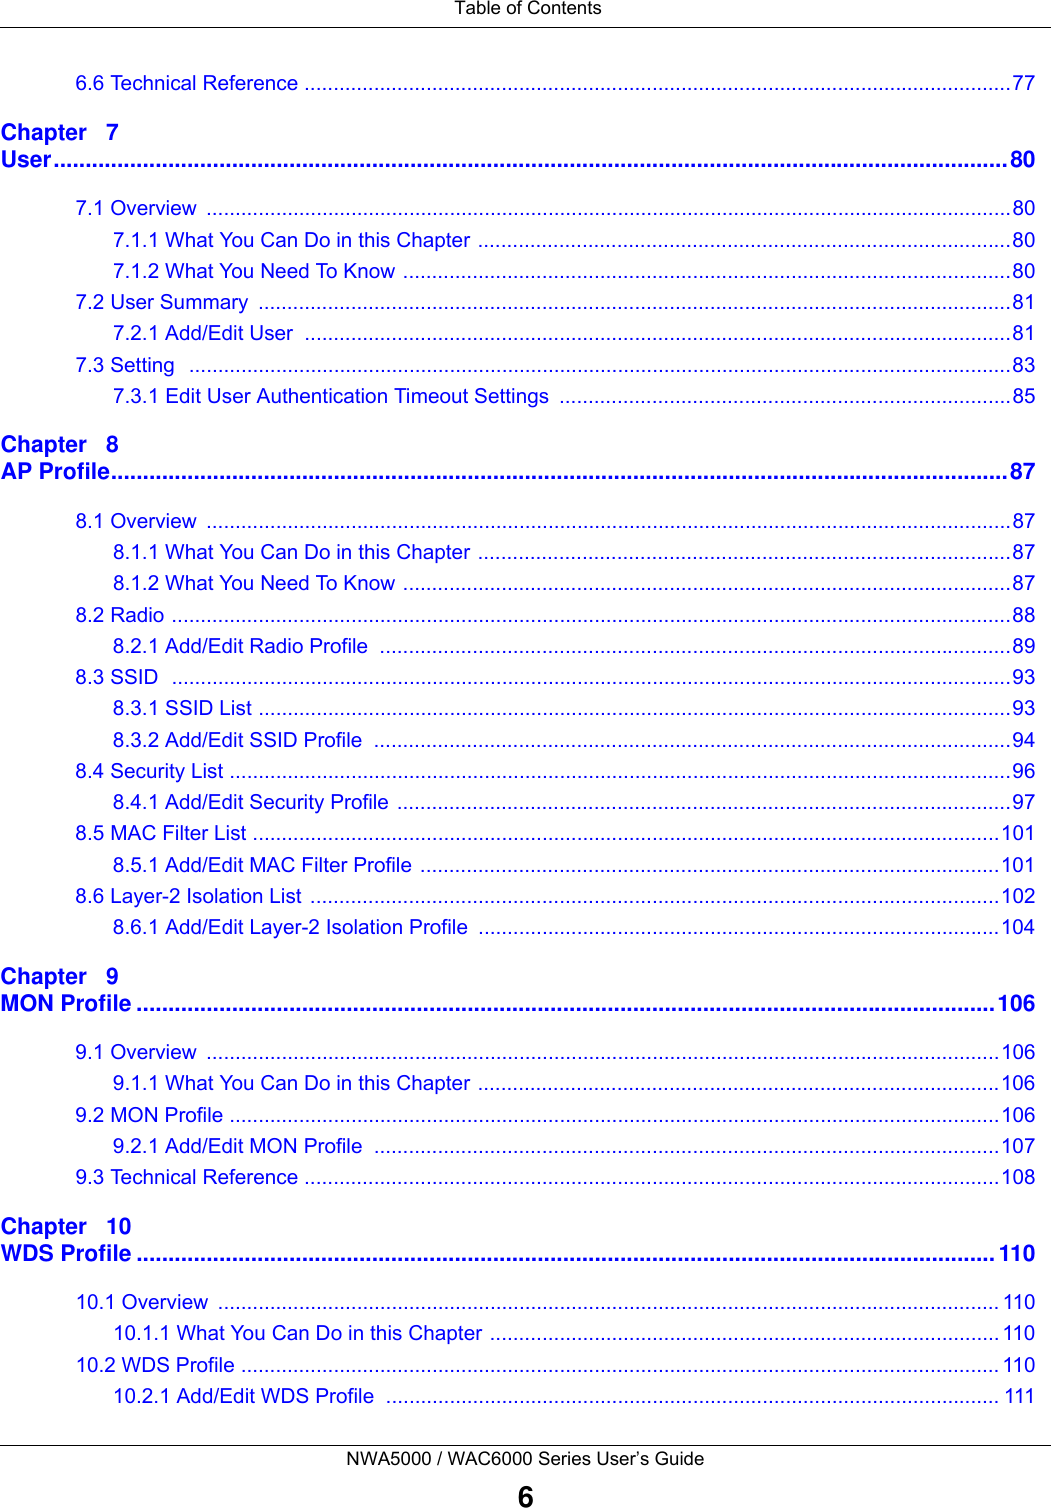 Table of ContentsNWA5000 / WAC6000 Series User’s Guide66.6 Technical Reference ..........................................................................................................................77Chapter   7User......................................................................................................................................................807.1 Overview  ...........................................................................................................................................807.1.1 What You Can Do in this Chapter ............................................................................................807.1.2 What You Need To Know .........................................................................................................807.2 User Summary  ..................................................................................................................................817.2.1 Add/Edit User  ..........................................................................................................................817.3 Setting   ..............................................................................................................................................837.3.1 Edit User Authentication Timeout Settings  ..............................................................................85Chapter   8AP Profile.............................................................................................................................................878.1 Overview  ...........................................................................................................................................878.1.1 What You Can Do in this Chapter ............................................................................................878.1.2 What You Need To Know .........................................................................................................878.2 Radio .................................................................................................................................................888.2.1 Add/Edit Radio Profile  .............................................................................................................898.3 SSID  .................................................................................................................................................938.3.1 SSID List ..................................................................................................................................938.3.2 Add/Edit SSID Profile  ..............................................................................................................948.4 Security List .......................................................................................................................................968.4.1 Add/Edit Security Profile ..........................................................................................................978.5 MAC Filter List .................................................................................................................................1018.5.1 Add/Edit MAC Filter Profile ....................................................................................................1018.6 Layer-2 Isolation List .......................................................................................................................1028.6.1 Add/Edit Layer-2 Isolation Profile ..........................................................................................104Chapter   9MON Profile .......................................................................................................................................1069.1 Overview  .........................................................................................................................................1069.1.1 What You Can Do in this Chapter ..........................................................................................1069.2 MON Profile .....................................................................................................................................1069.2.1 Add/Edit MON Profile  ............................................................................................................1079.3 Technical Reference ........................................................................................................................108Chapter   10WDS Profile .......................................................................................................................................11010.1 Overview  ....................................................................................................................................... 11010.1.1 What You Can Do in this Chapter ........................................................................................ 11010.2 WDS Profile ................................................................................................................................... 11010.2.1 Add/Edit WDS Profile  .......................................................................................................... 111